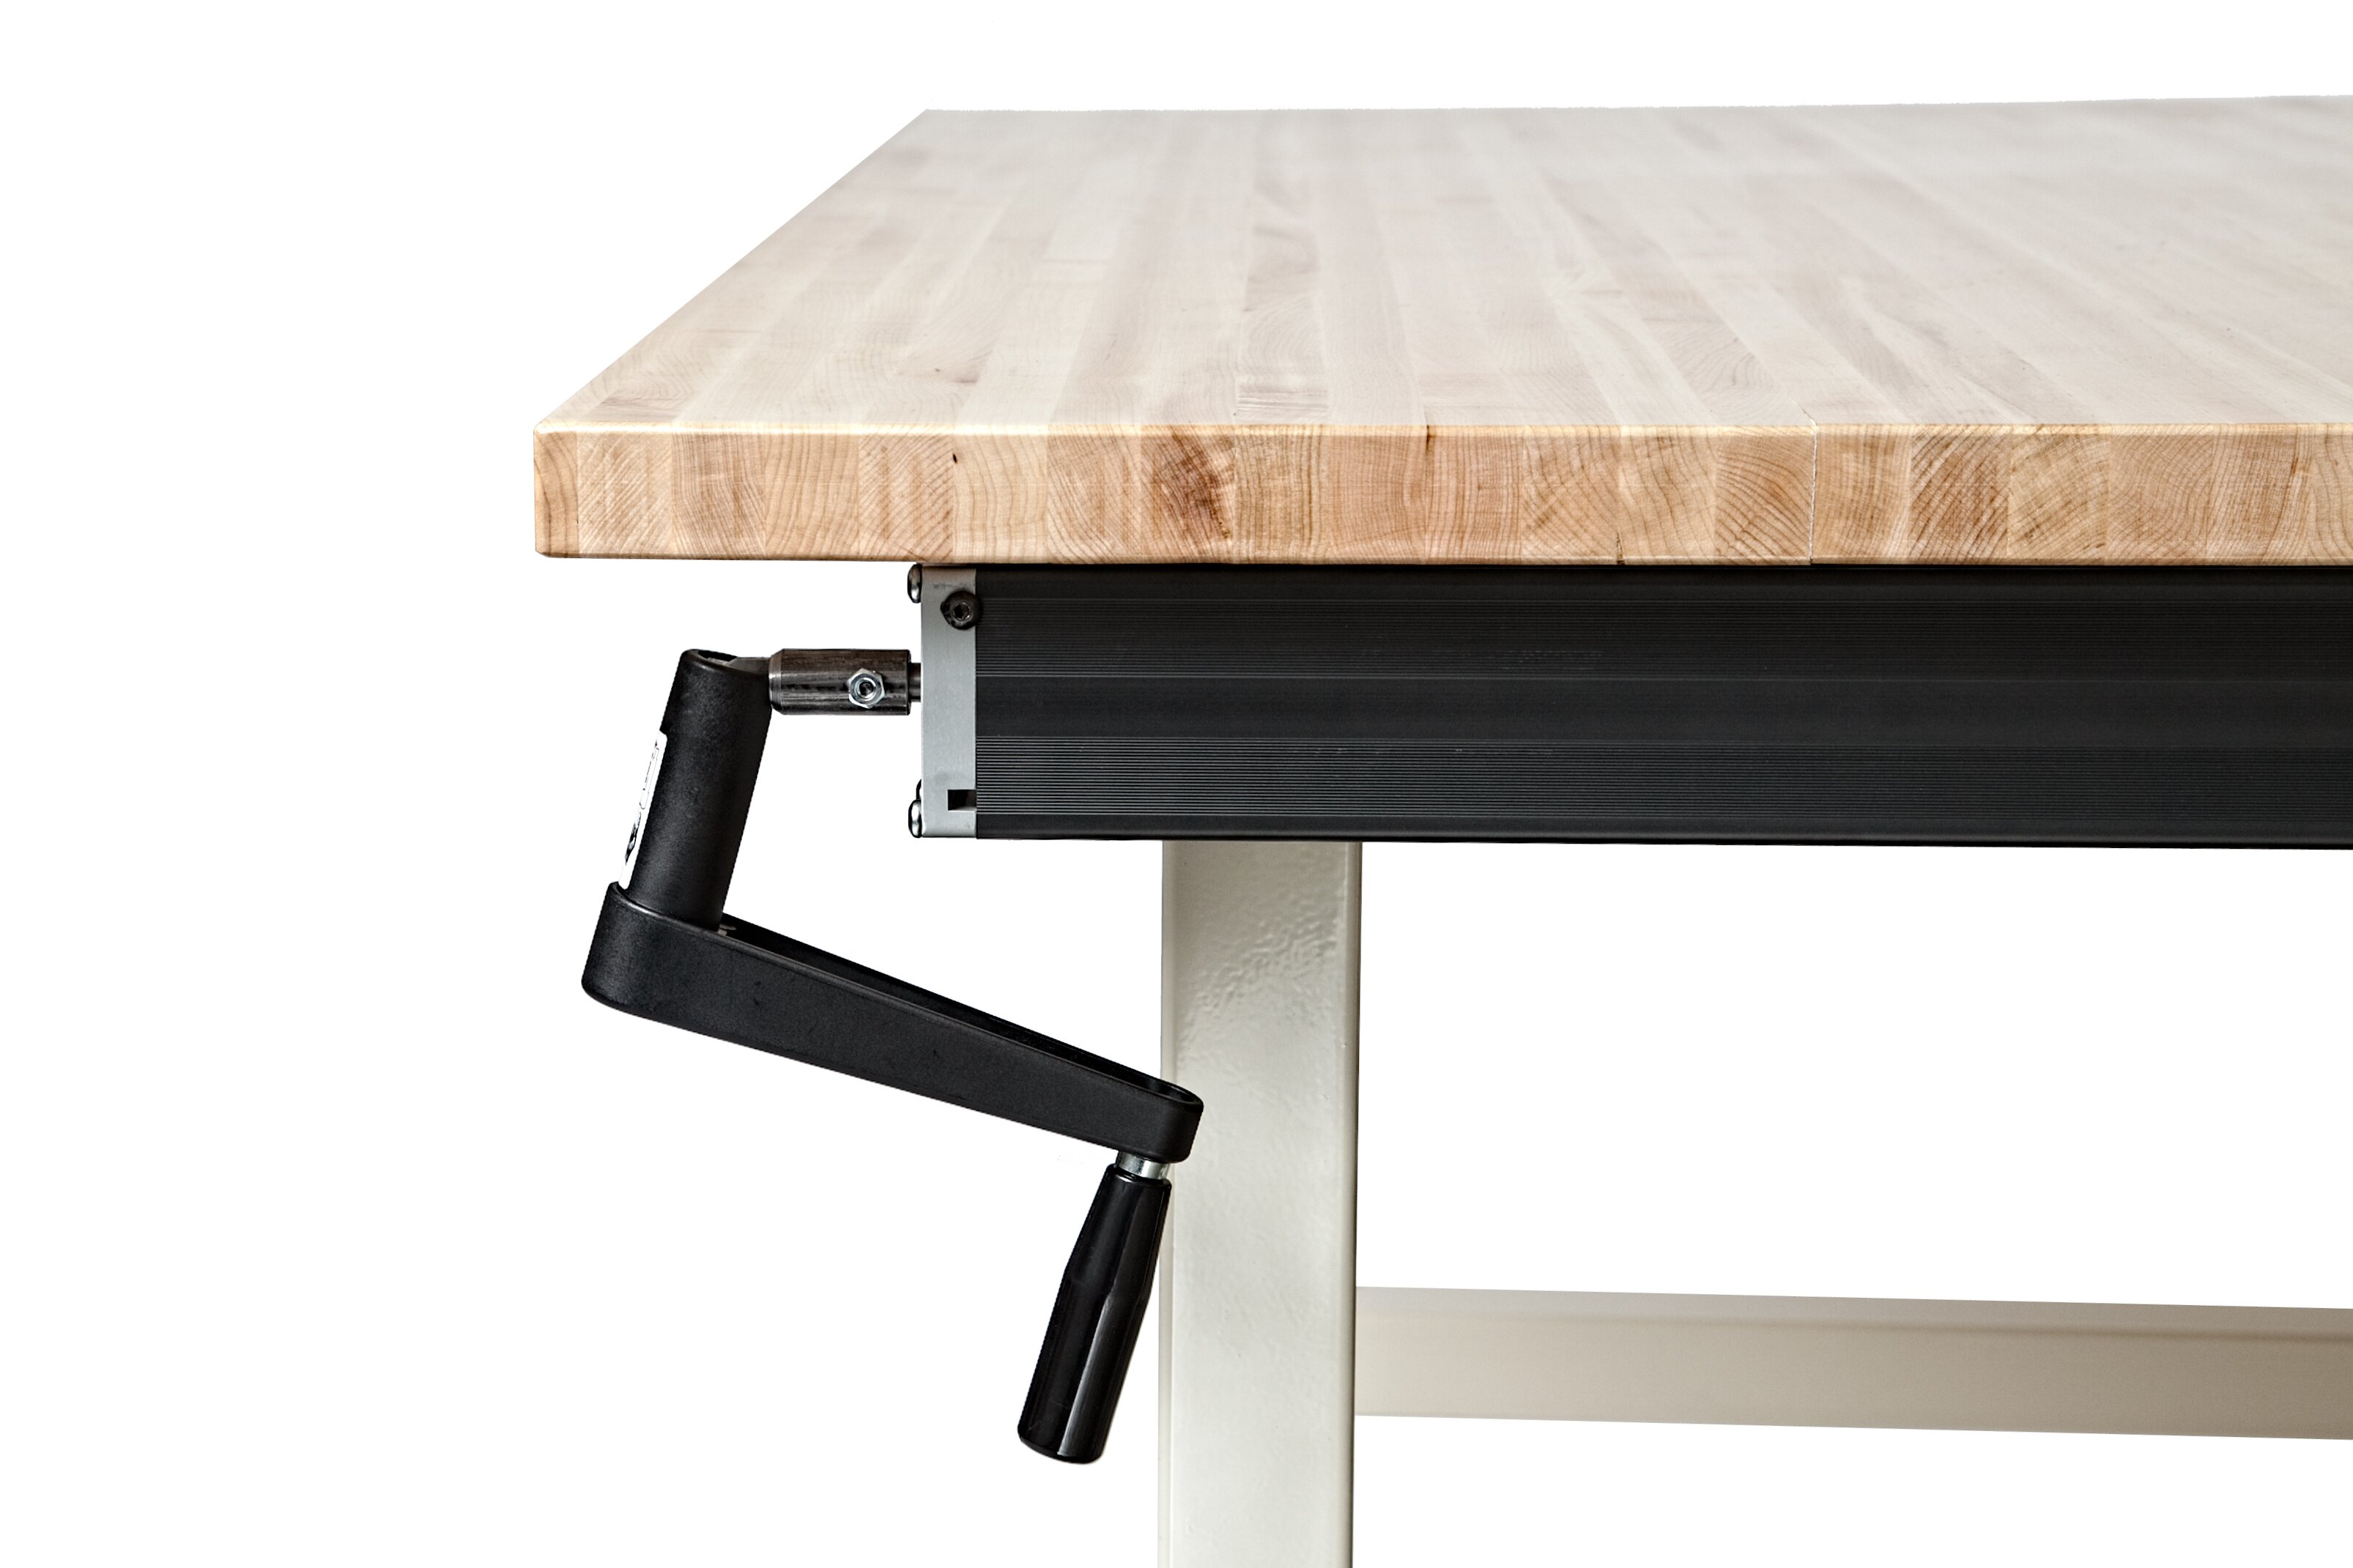 Work Bench Legs for Best Your Workspace Furniture Design: Sawhorse Table Legs | Standard Height For A Workbench | Work Bench Legs